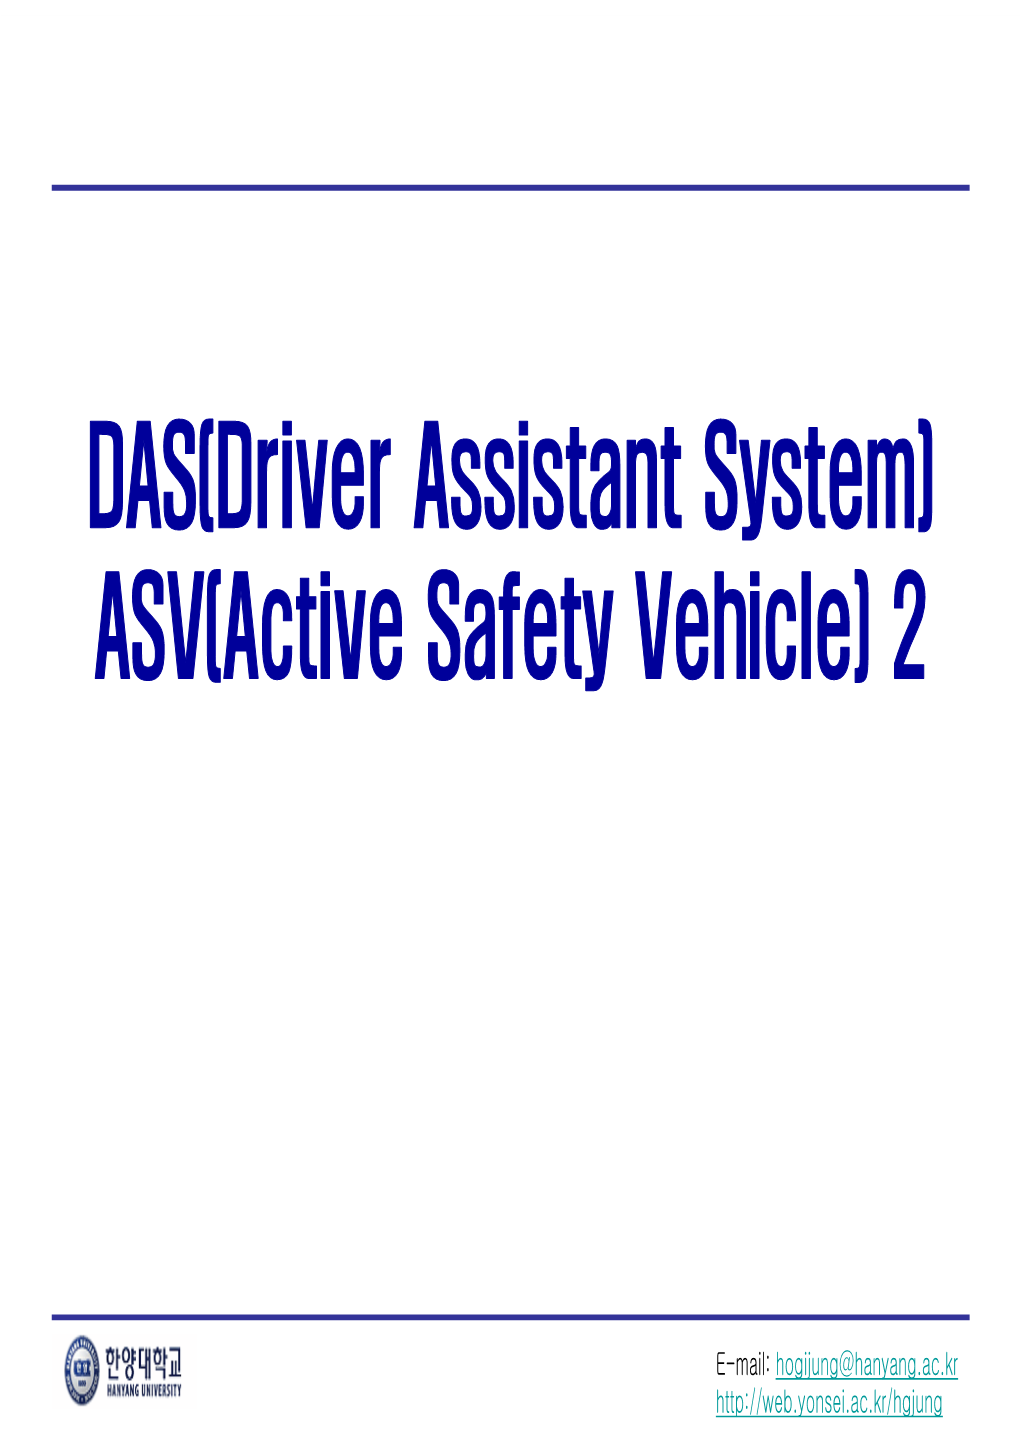 DAS(Driver Assistant System) ASV(Active Safety Vehicle) 2